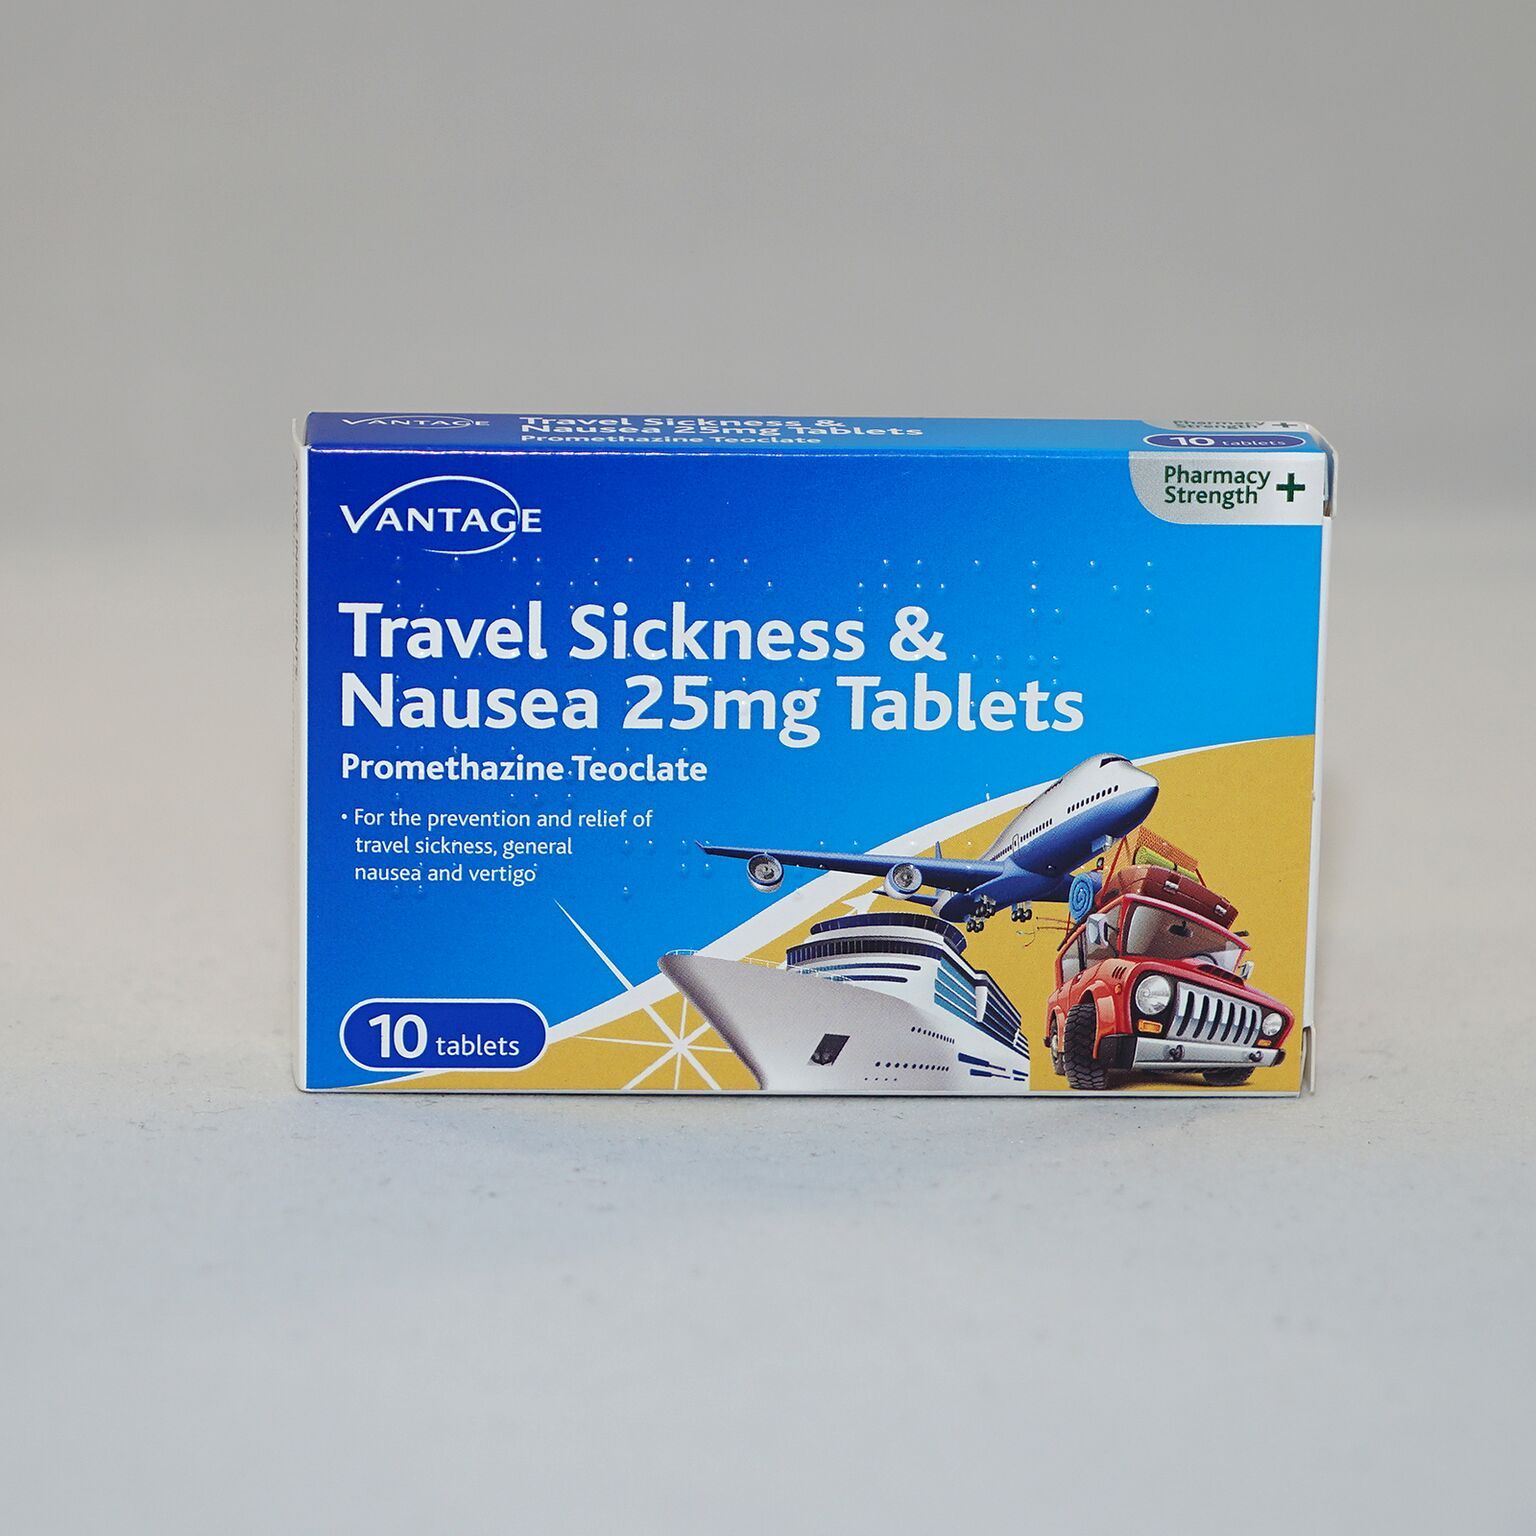 the travel sickness tablets